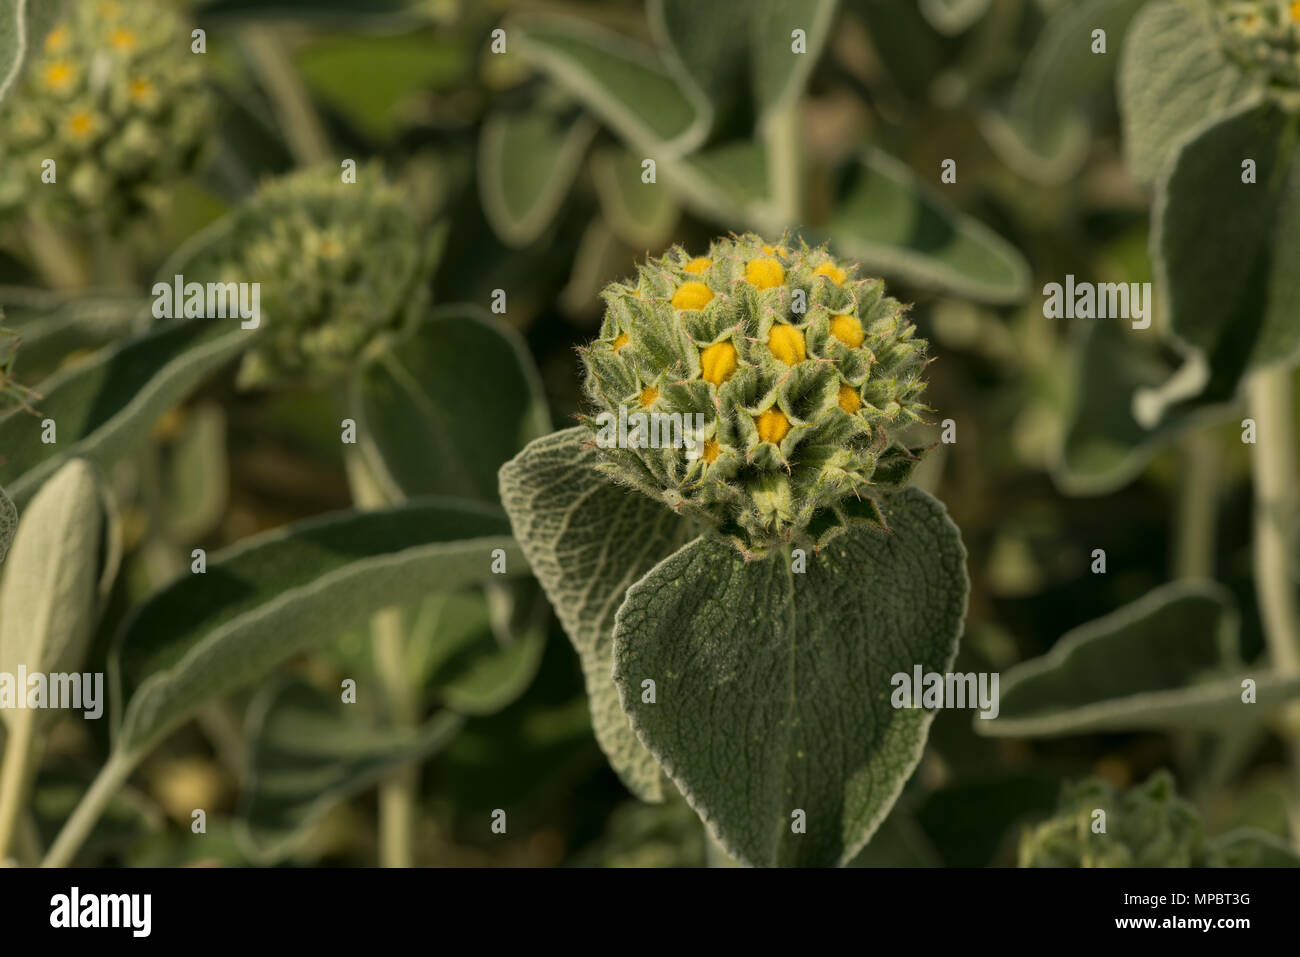 A Mediterranean shrub with bold grey leaves Jerusalem sage, Phlomis fruticosa, with young flower heads of varying degree of bloom architectural stems Stock Photo